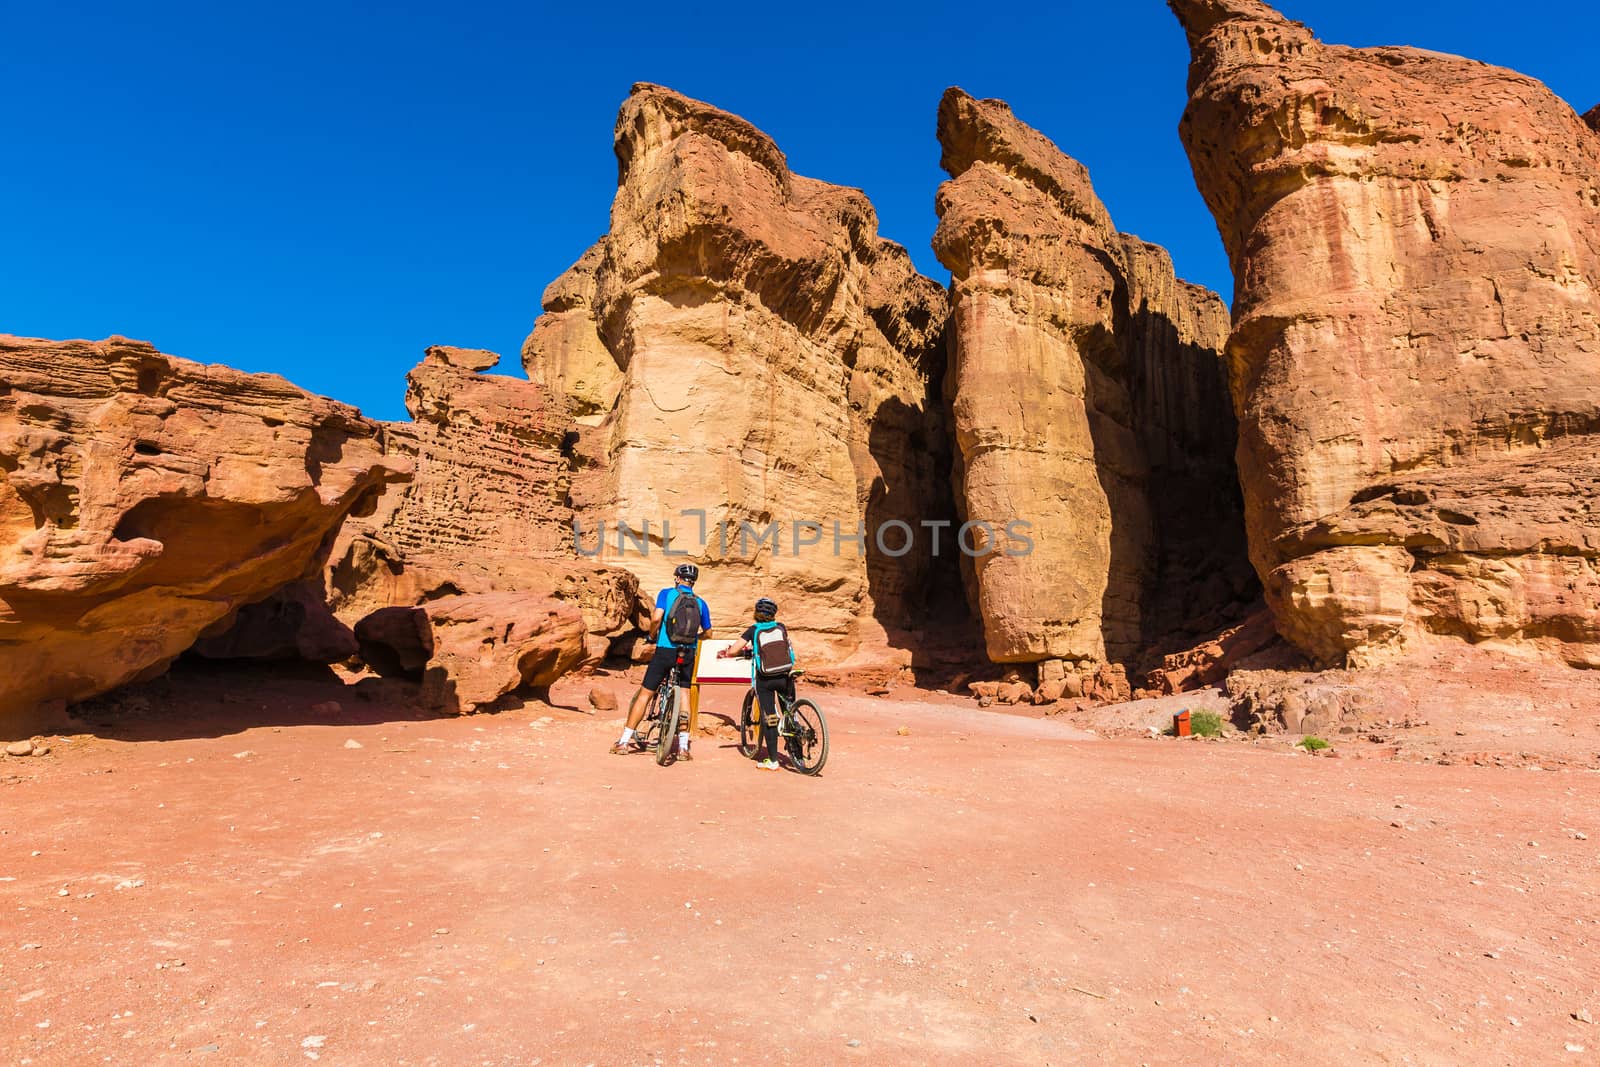 desert landscape, people riding bicycles along the canyon